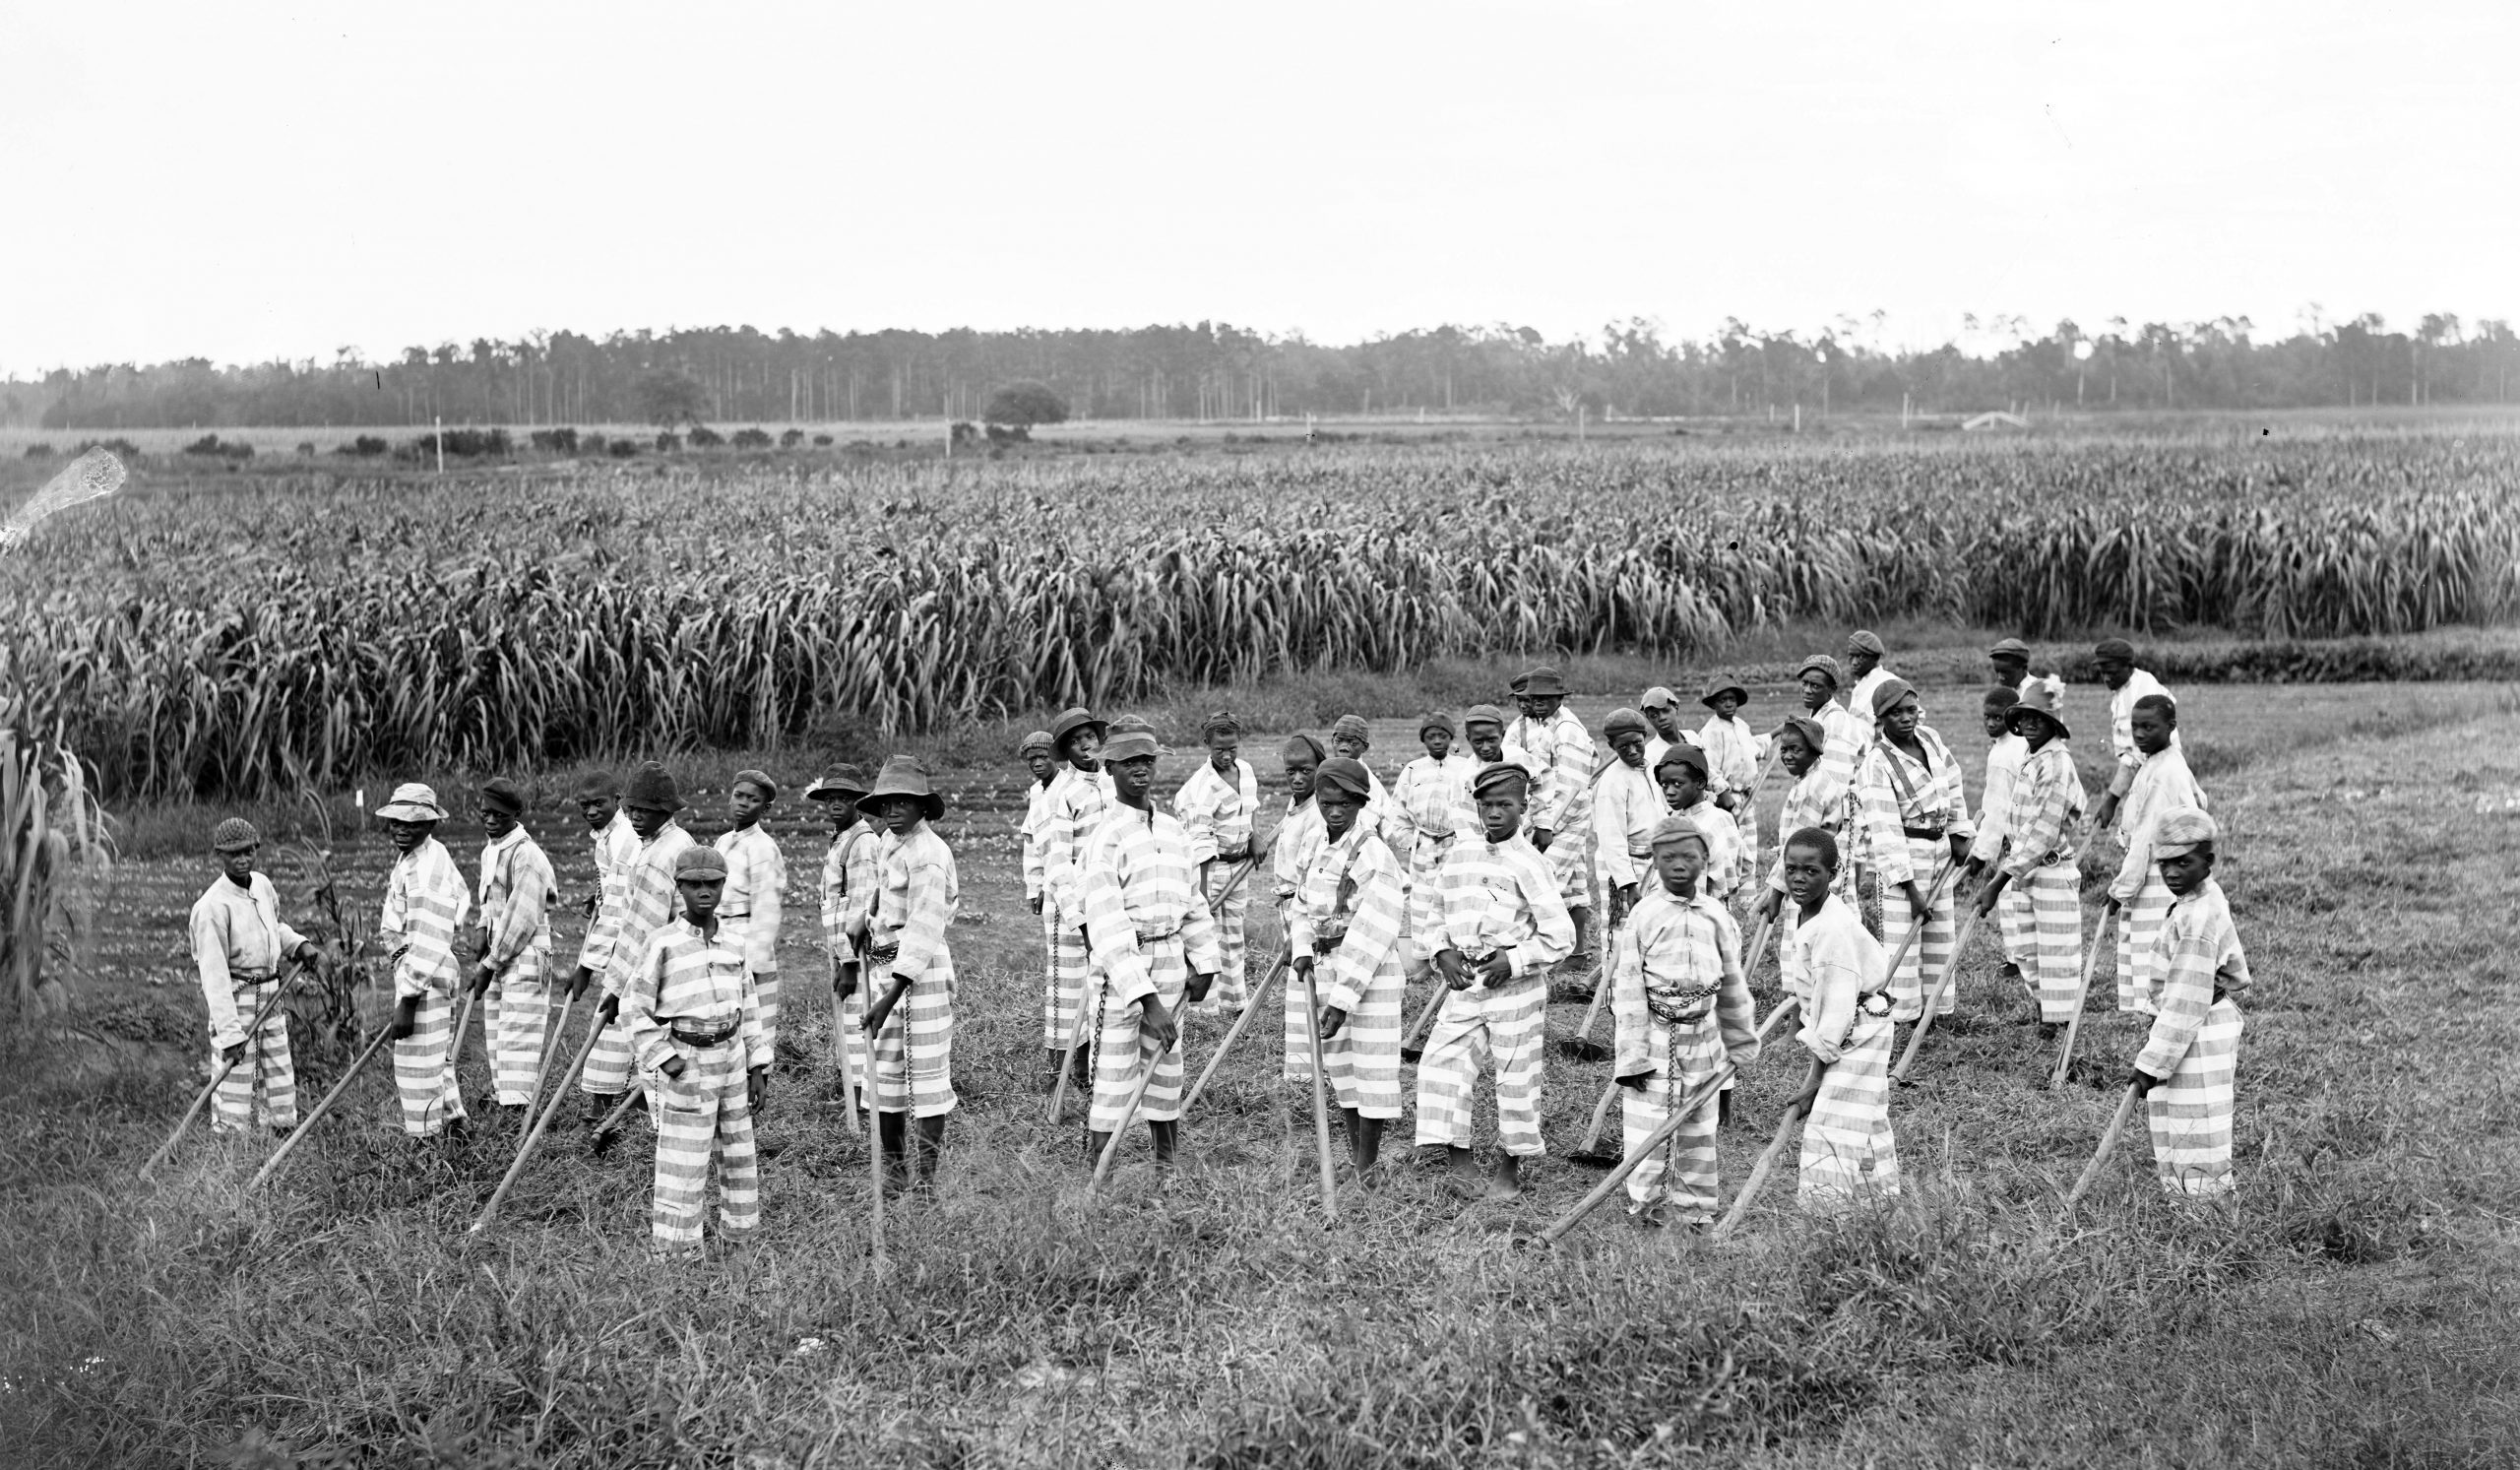 The 13th Amendment’s fatal flaw created modern-day convict slavery